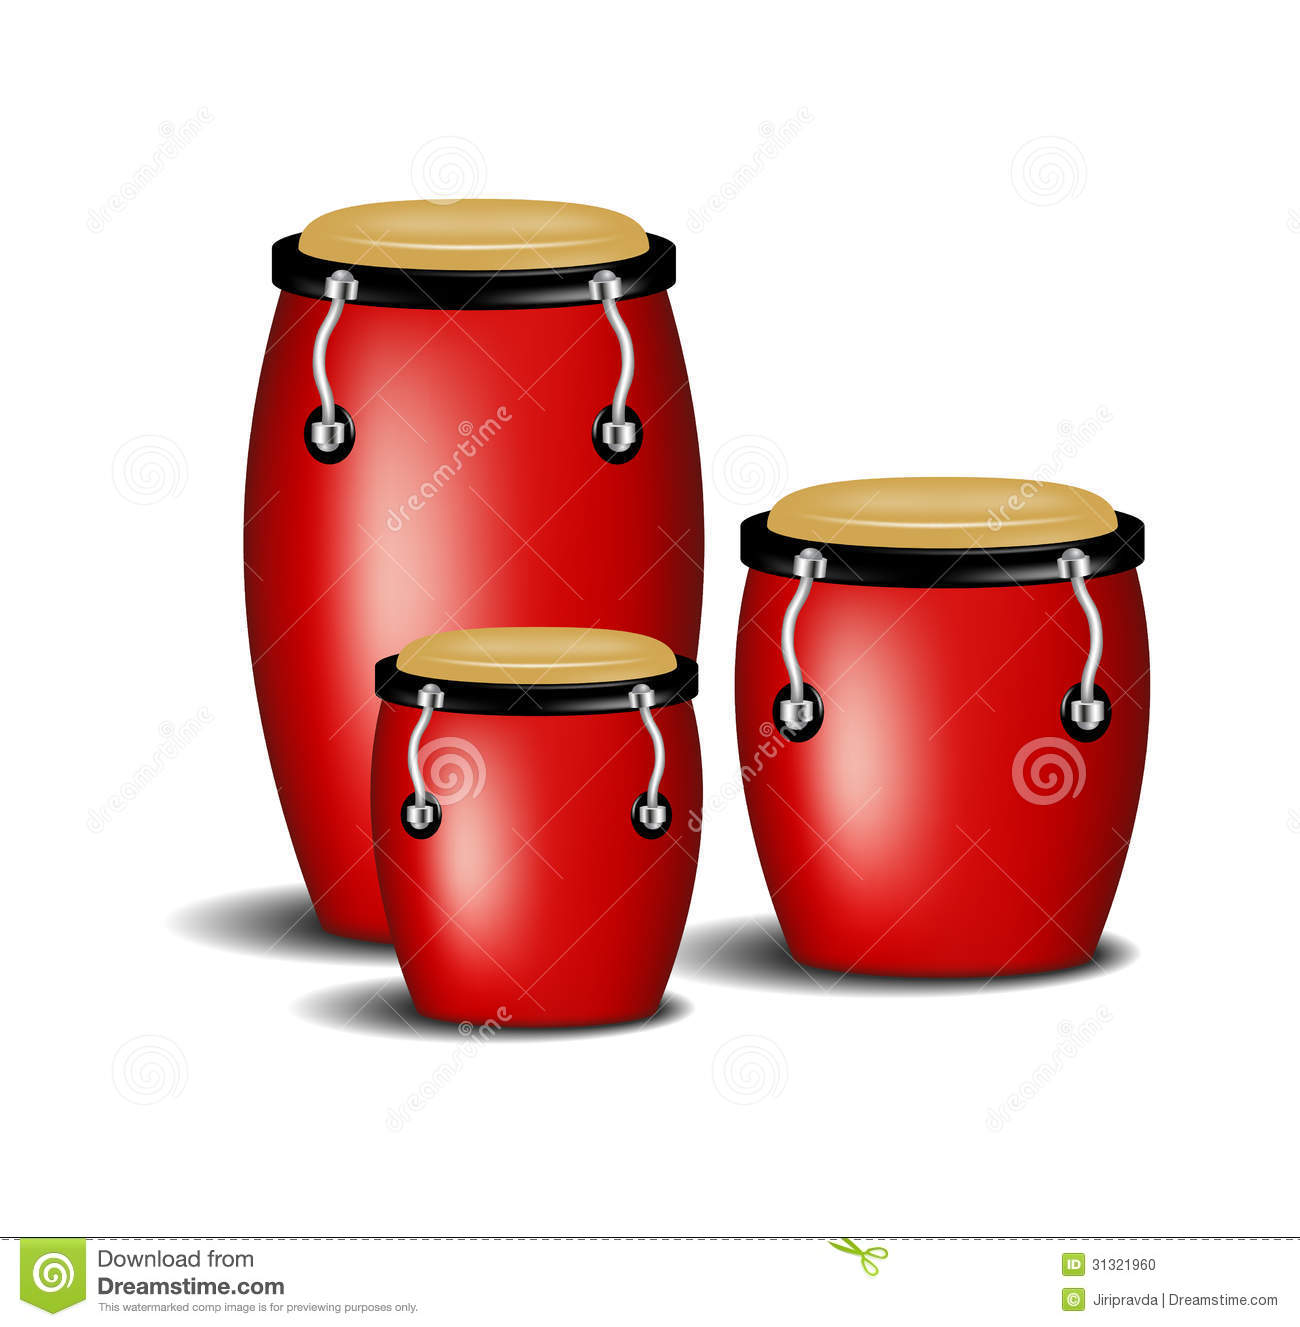 Congas Band In Red Design With Shadow On White Background 